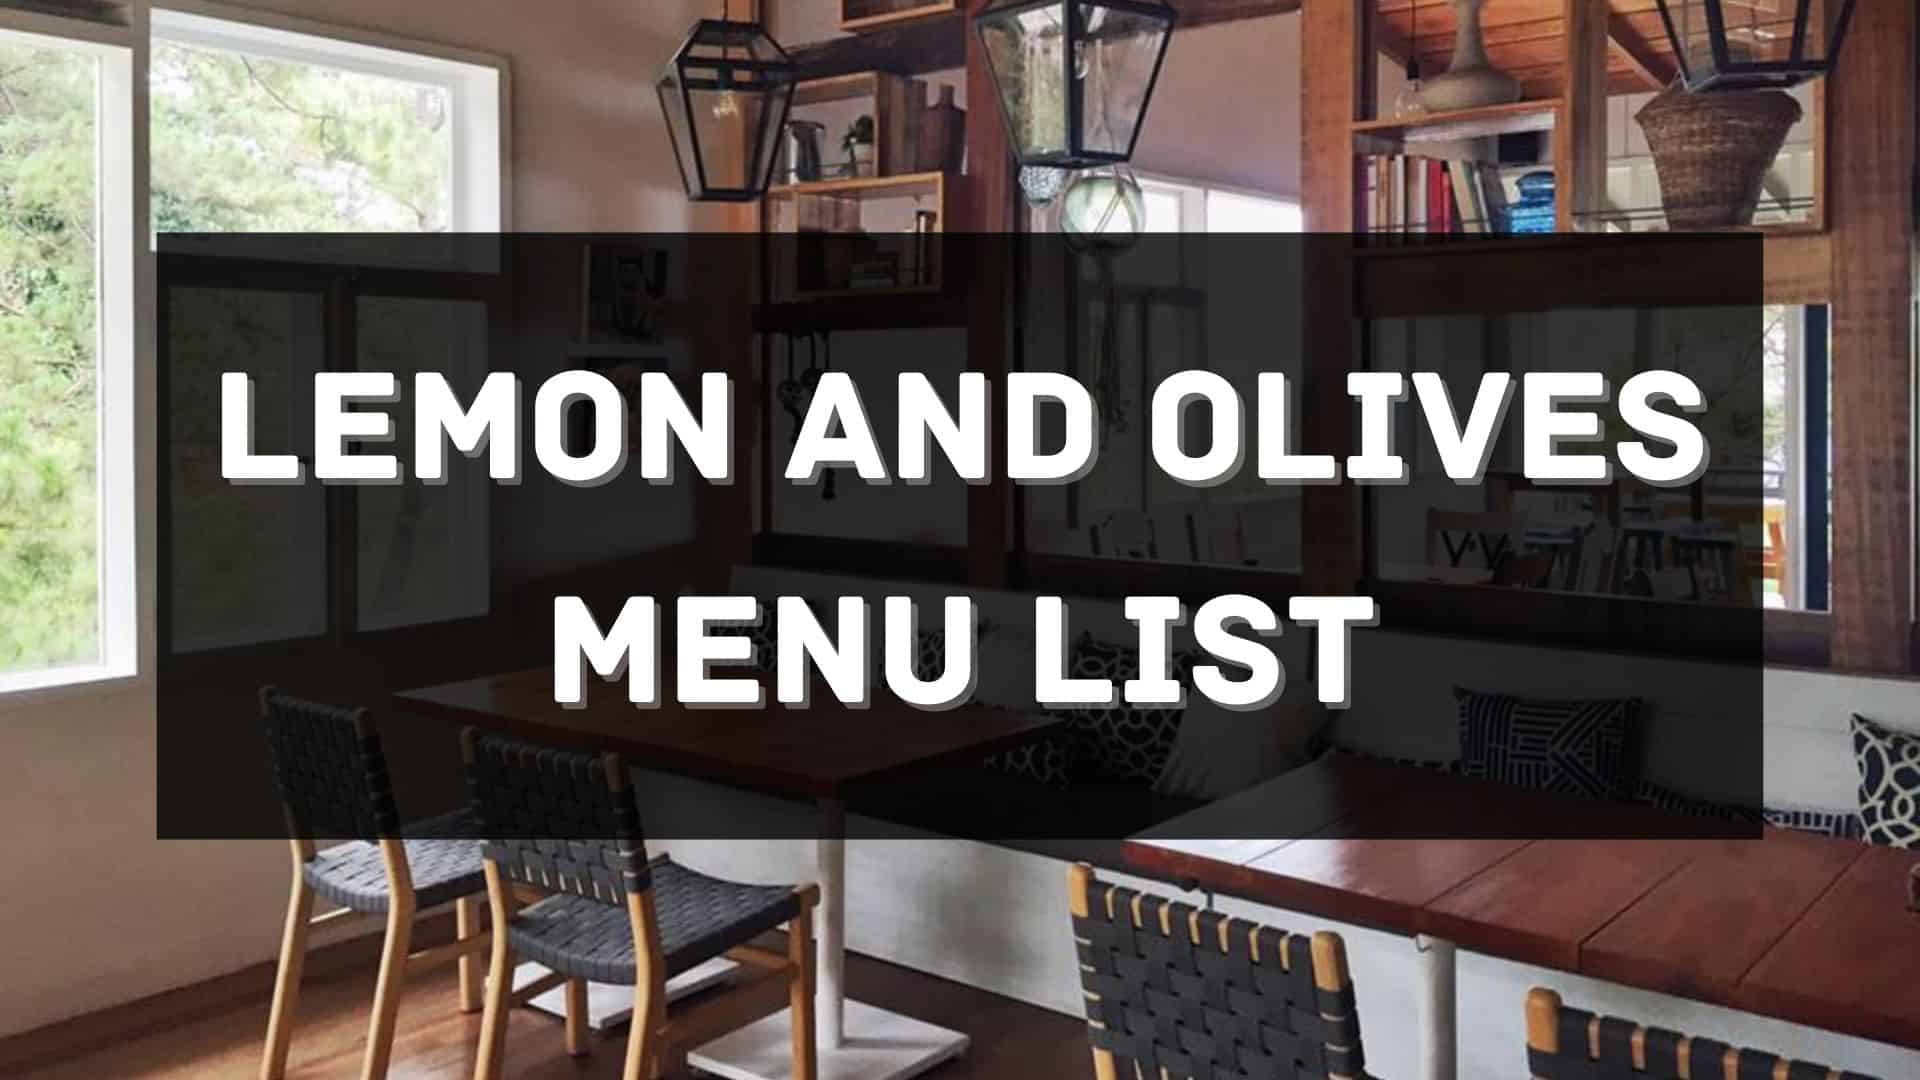 lemon and olives menu prices philippines